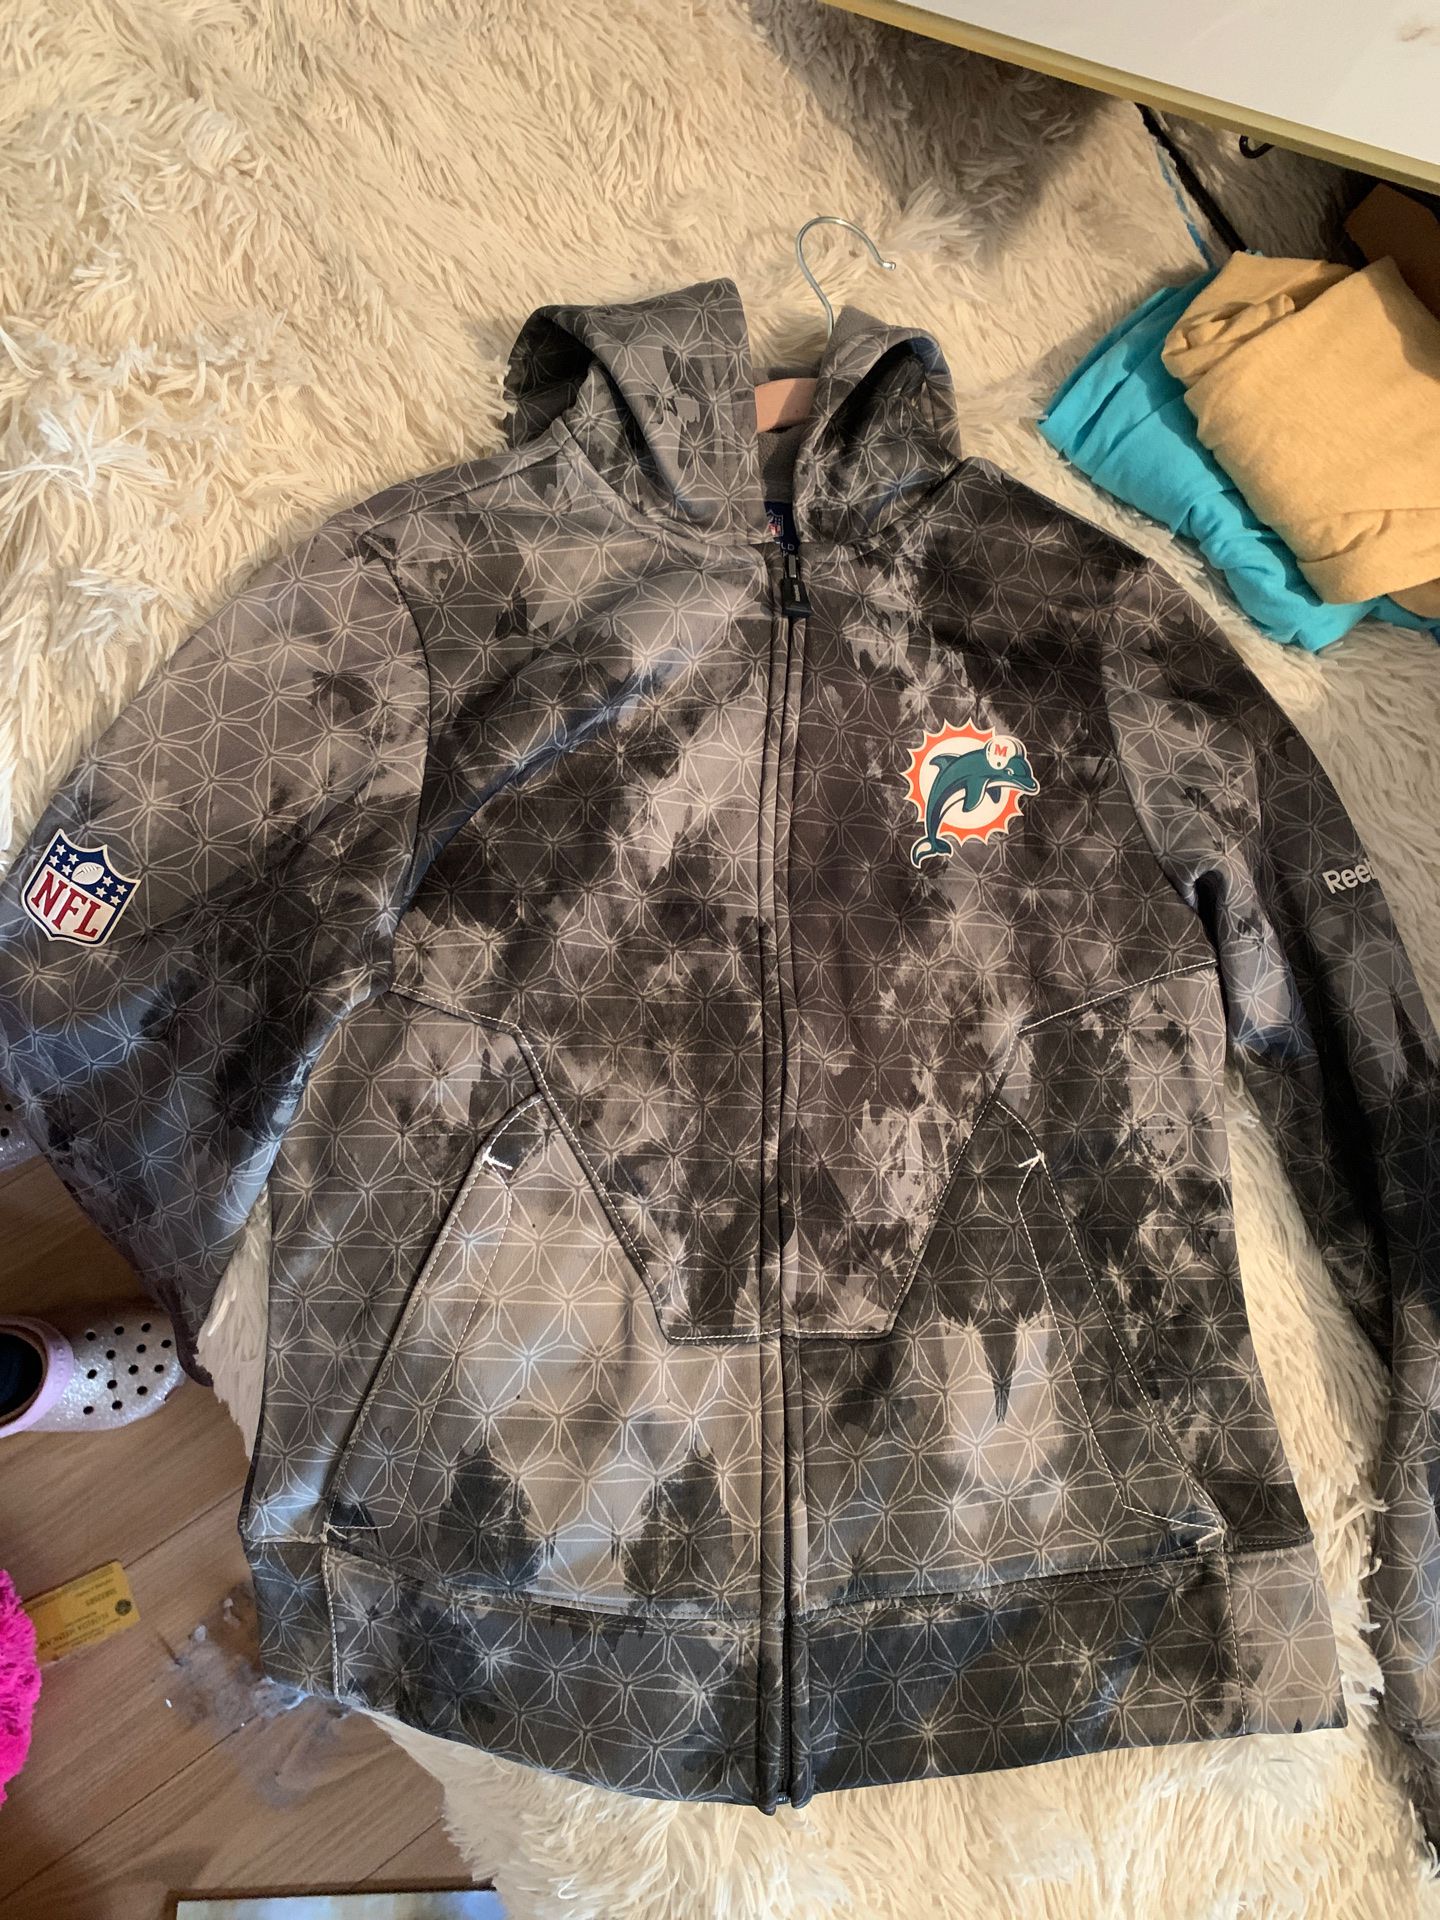 NFL Dolphins sweater